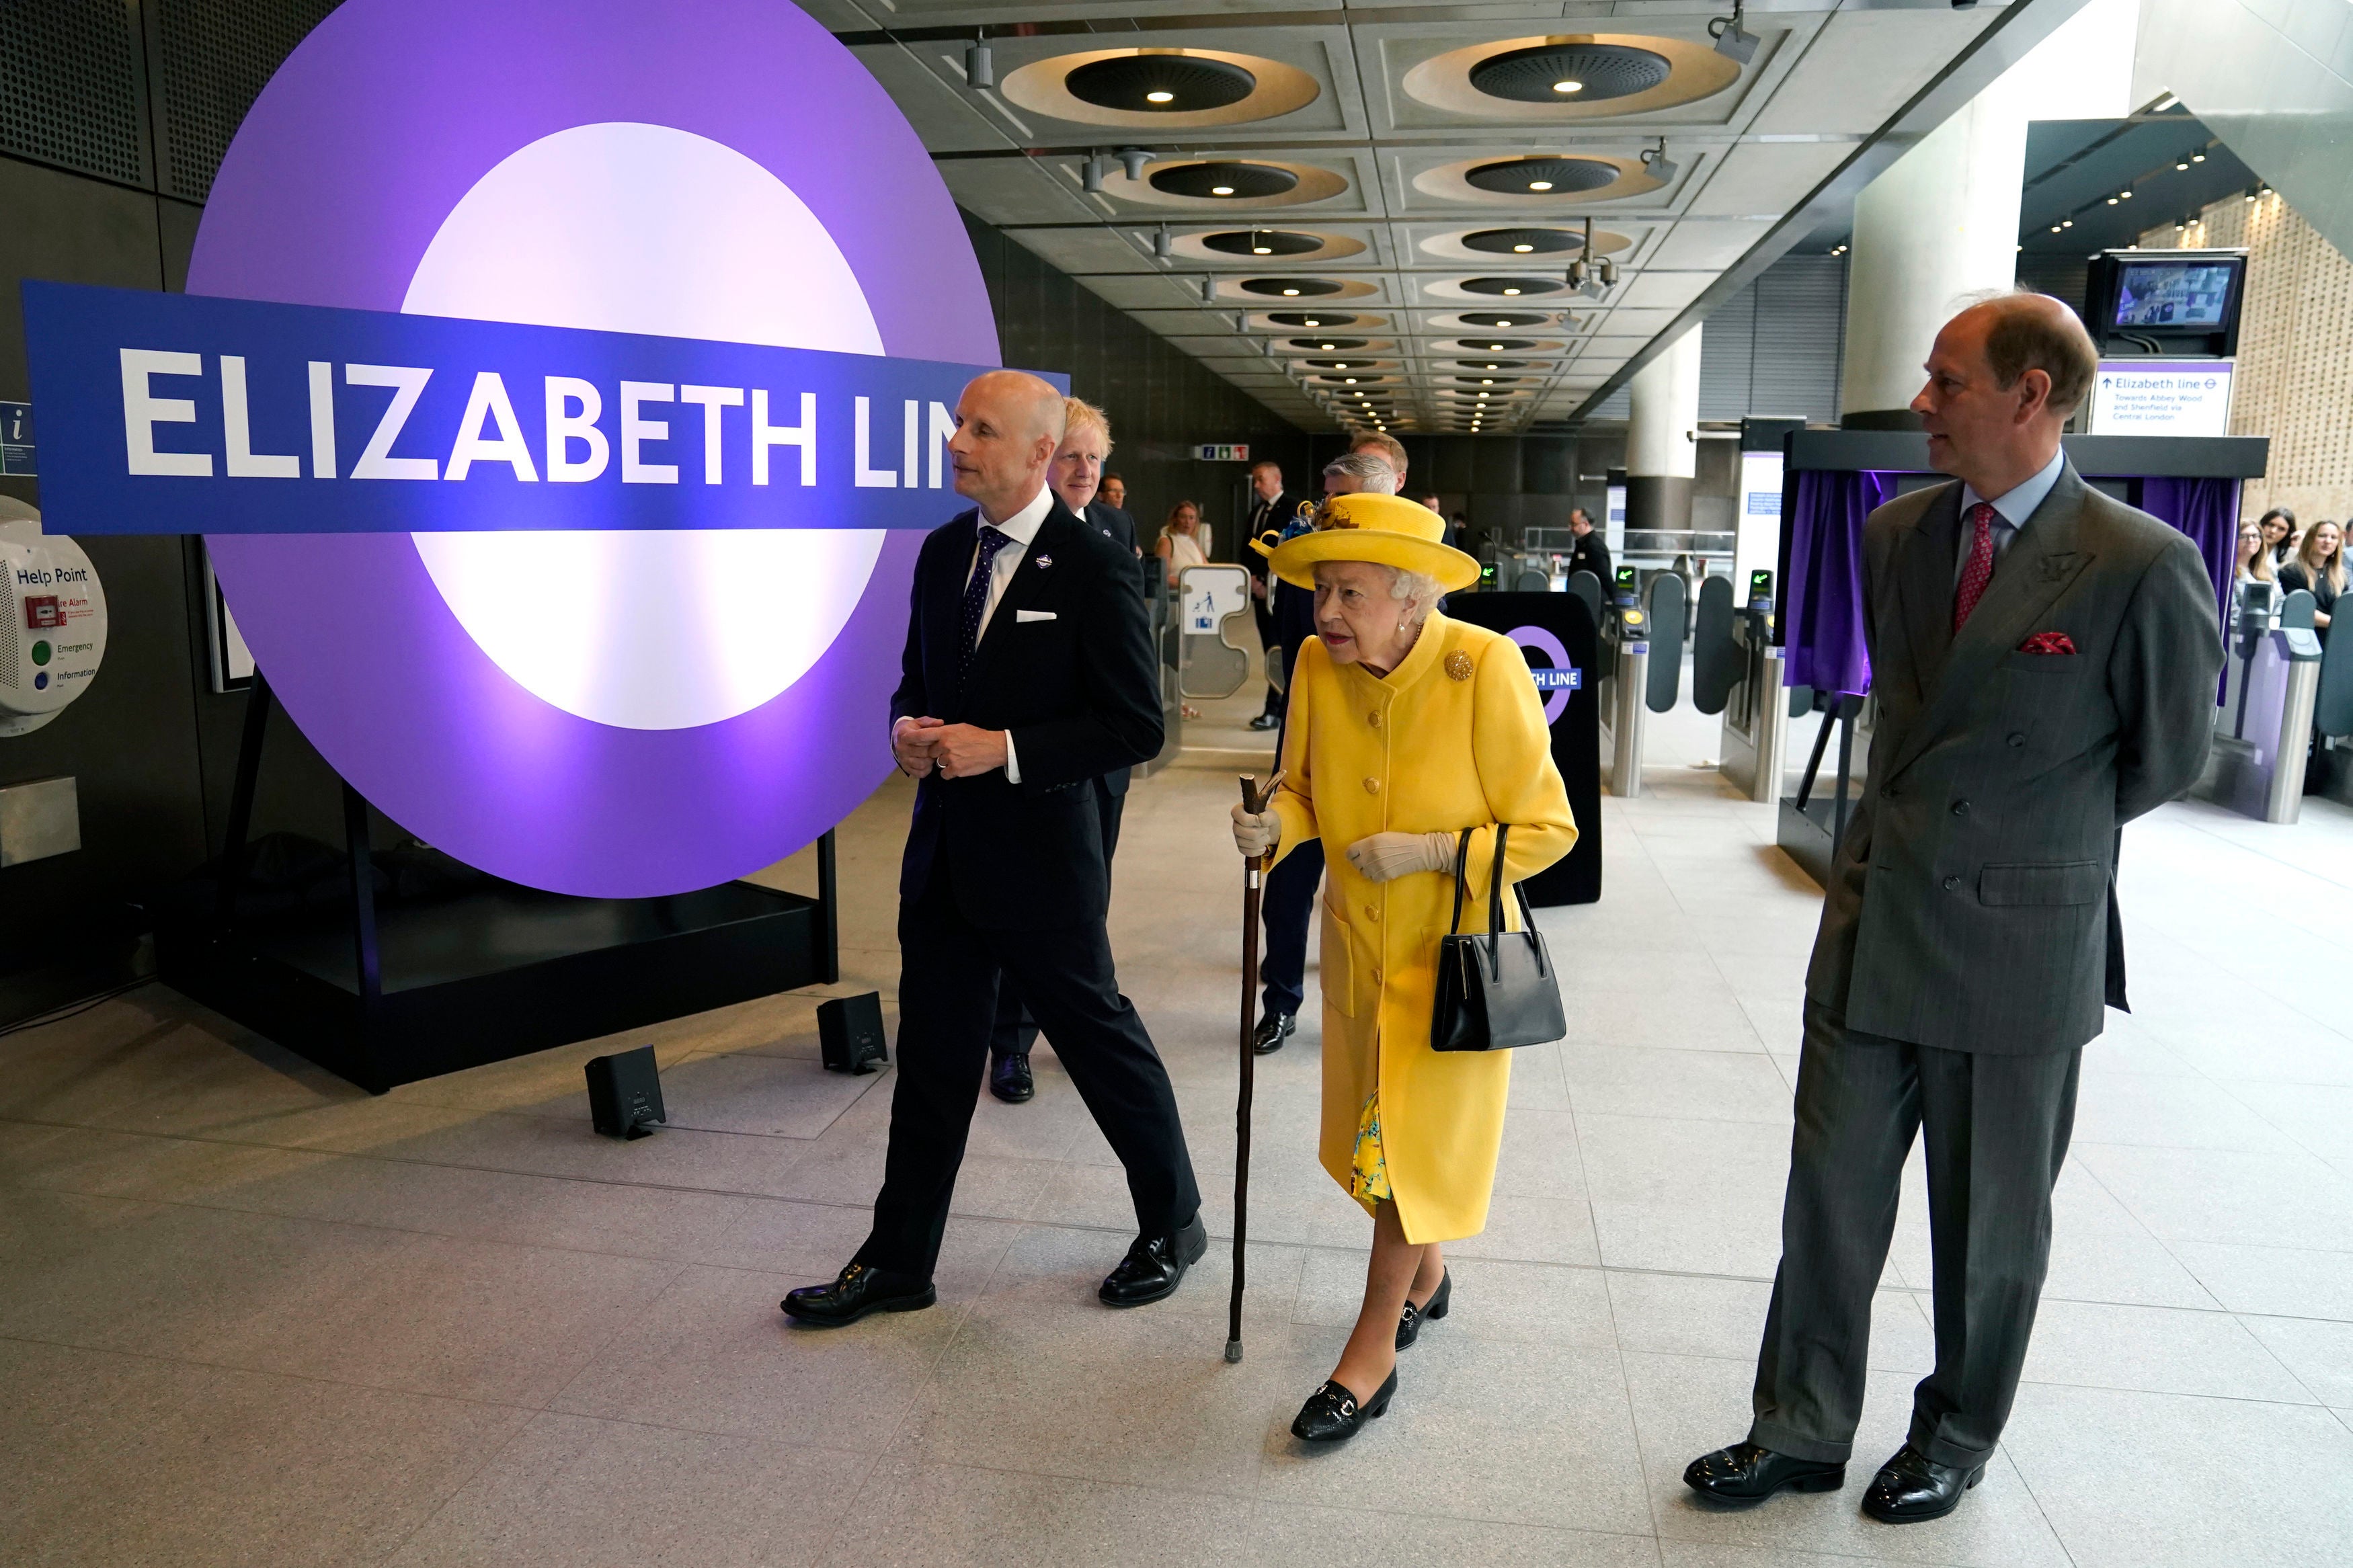 Queen Elizabeth II and Prince Edward, Earl of Wessex (R) mark the Elizabeth line's official opening at Paddington Station on May 17, 2022